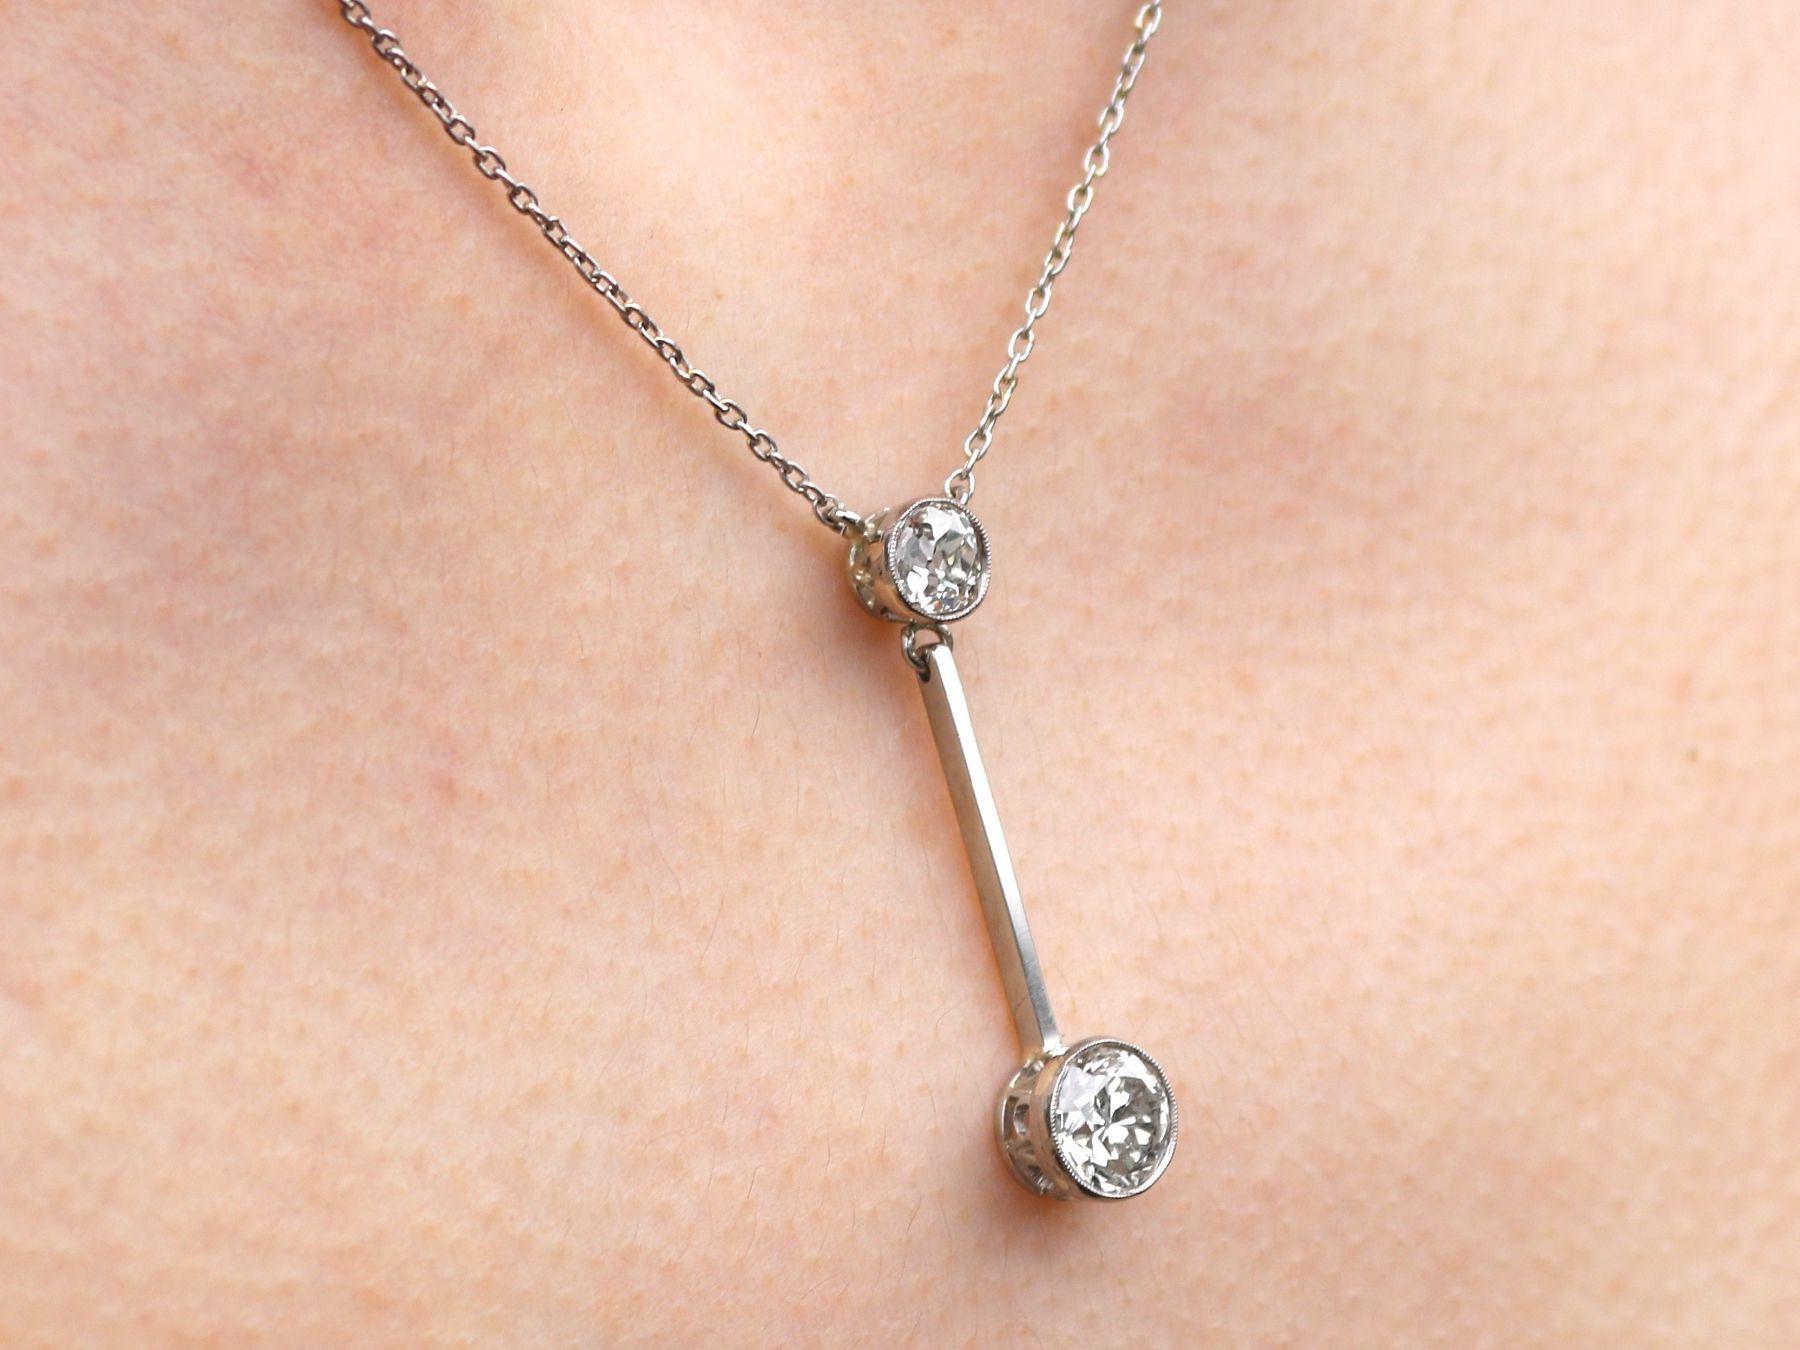 Antique 1.68 Carat Diamond and White Gold Necklace For Sale 4